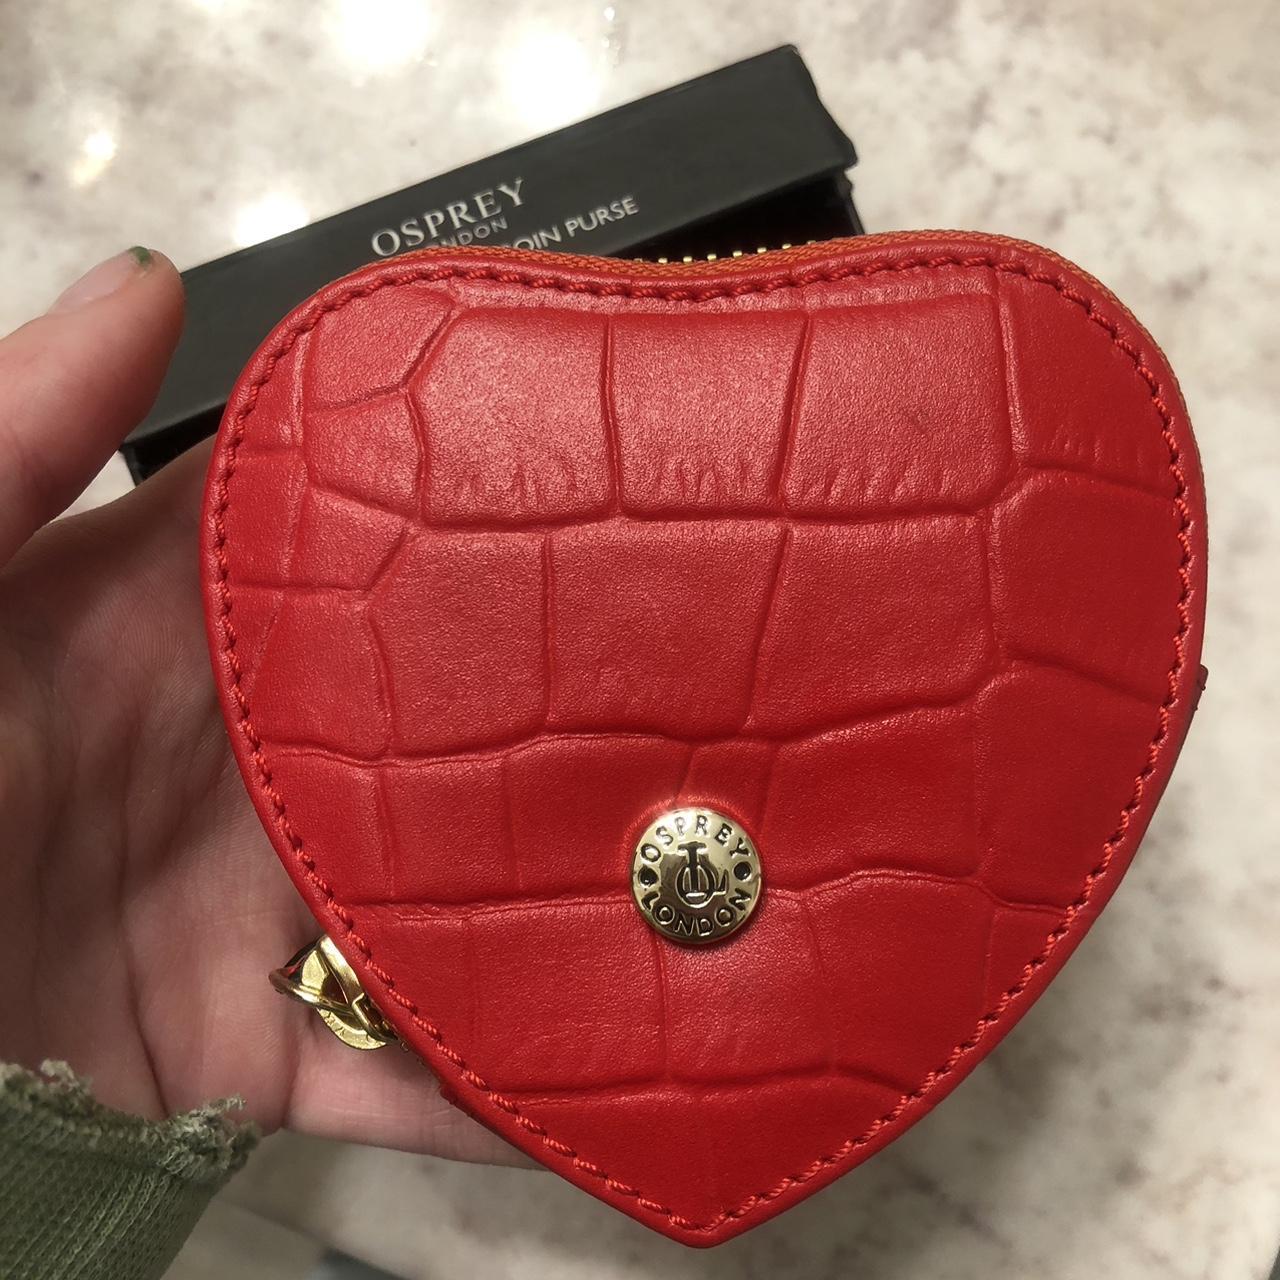 Osprey London Red Leather Heart Coin Purse❤️Red❤️Purse New in Gift Box